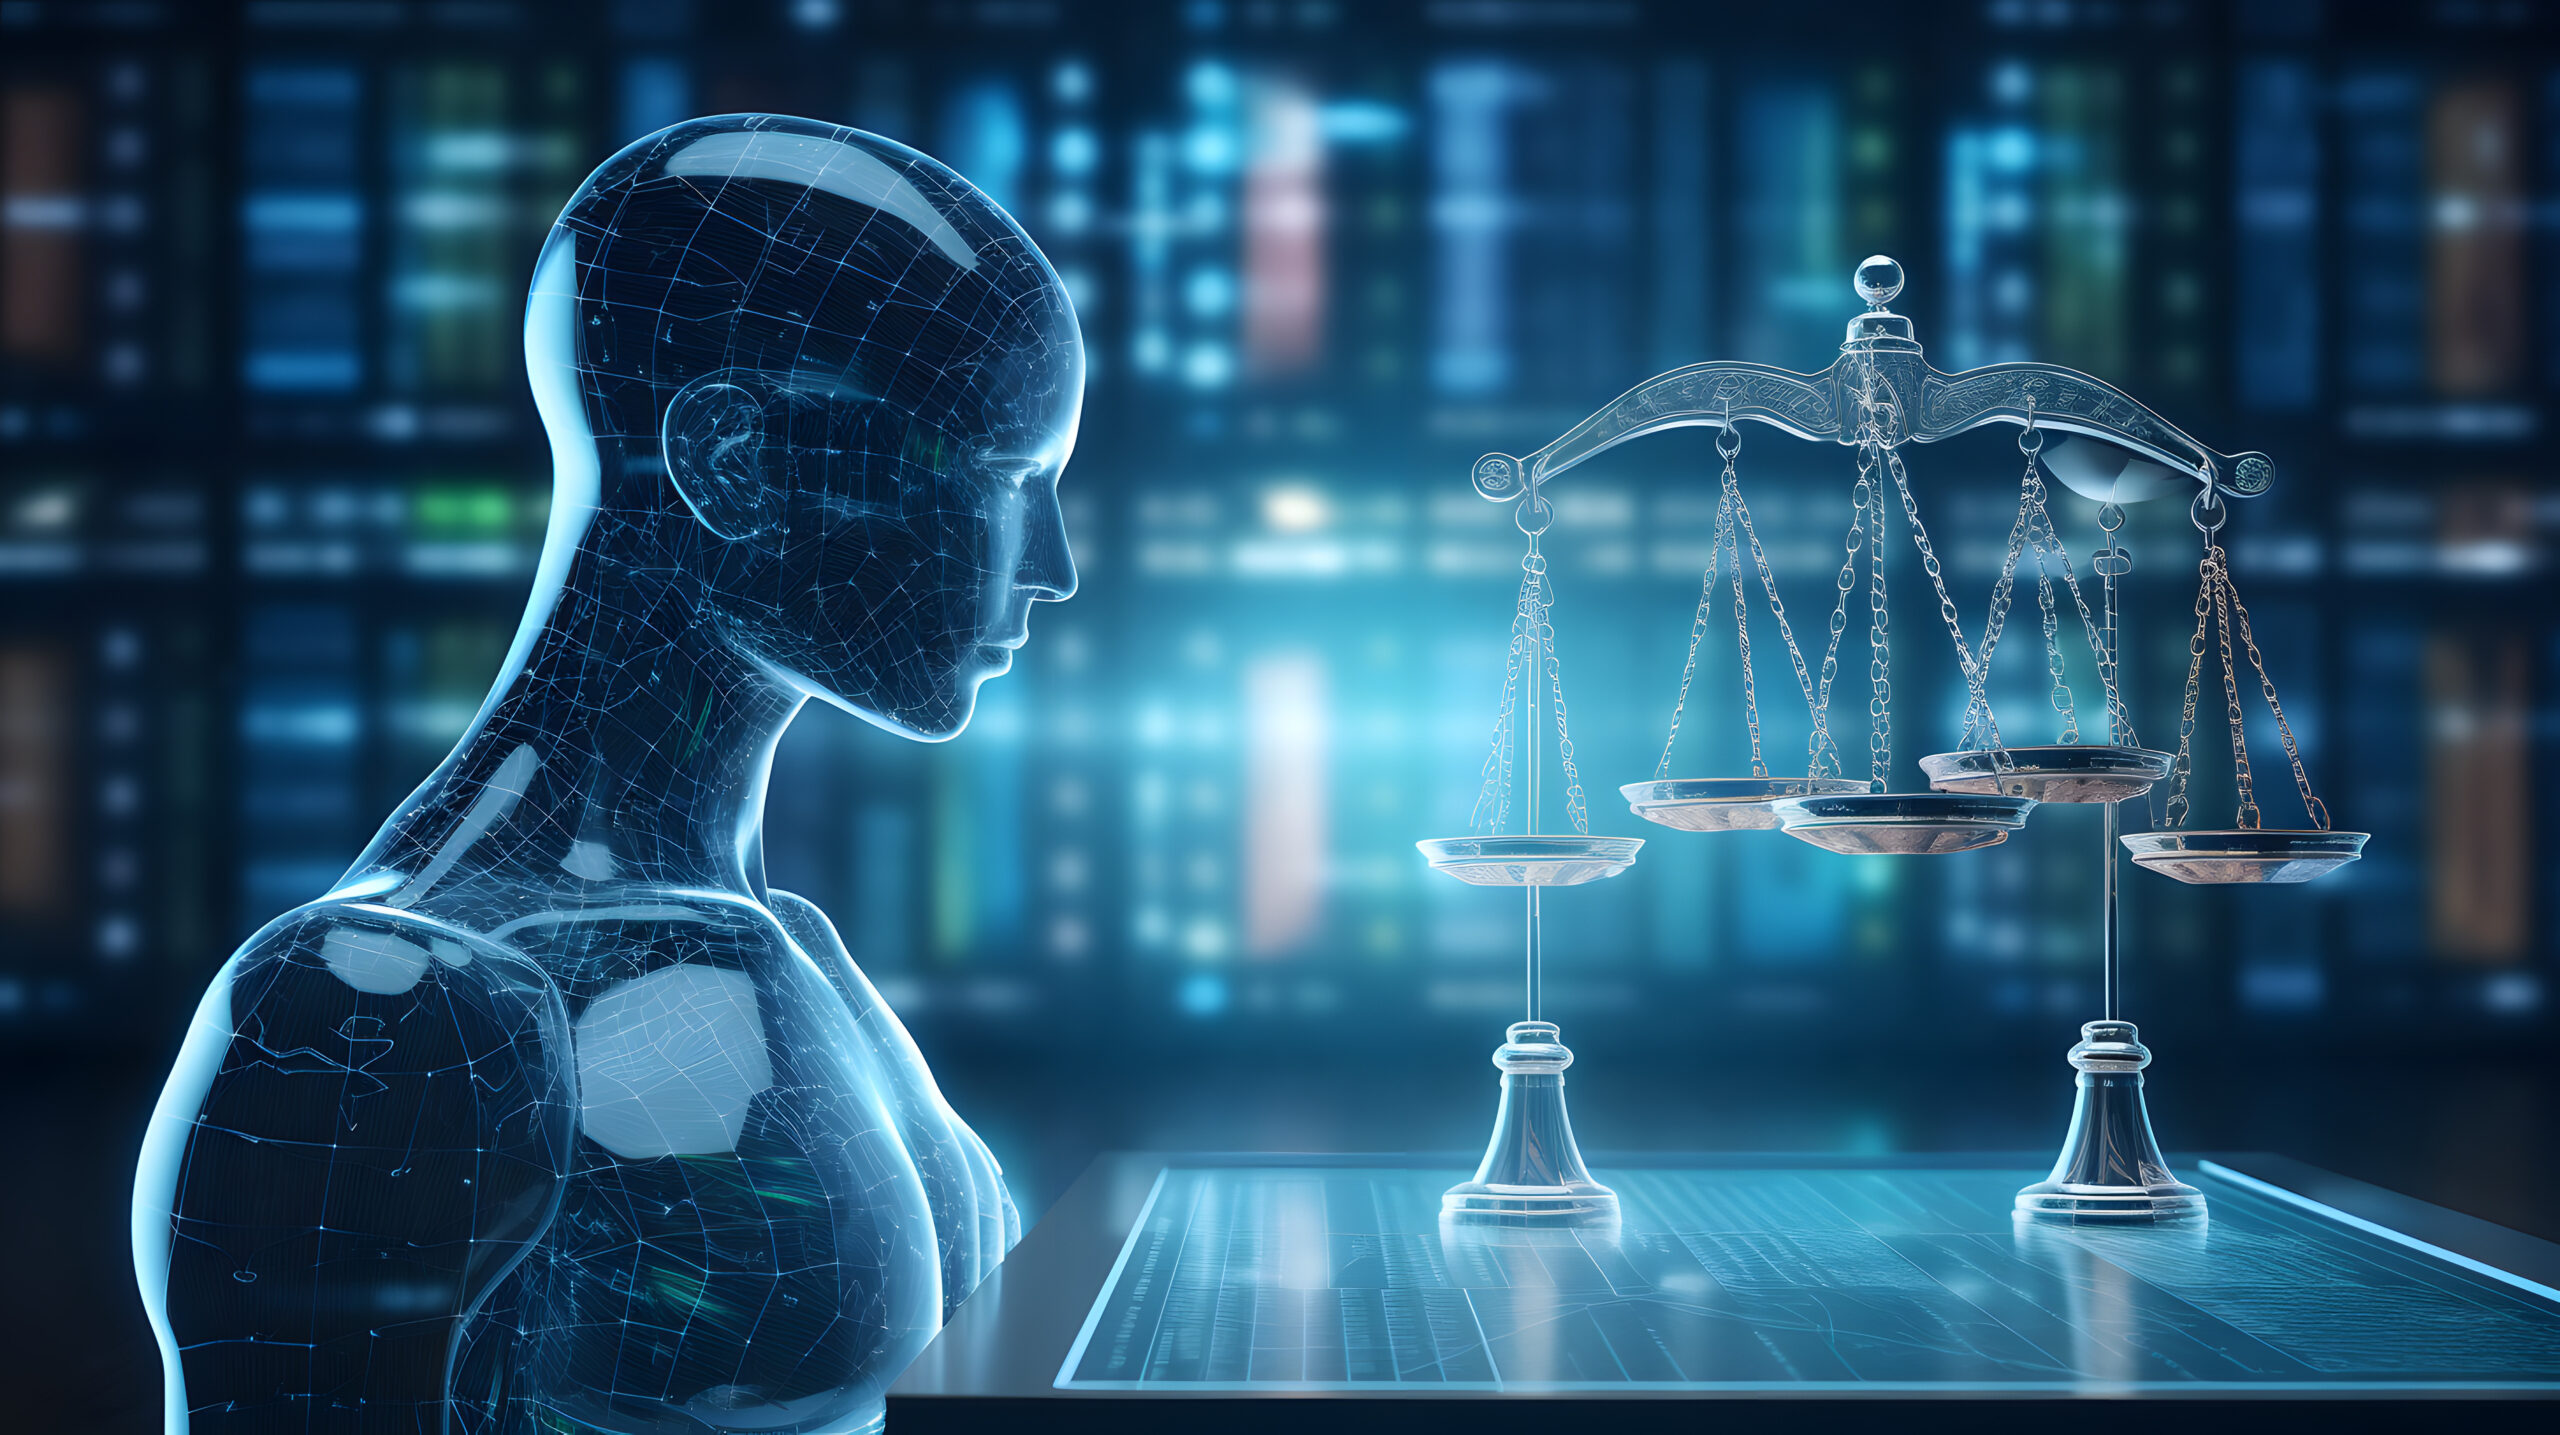 Lexbe is on the forefront of bringing GenAI technology to market to automate and revolutionize eDiscovery processes. We are equipping litigators with advanced capabilities that result in winning cases.